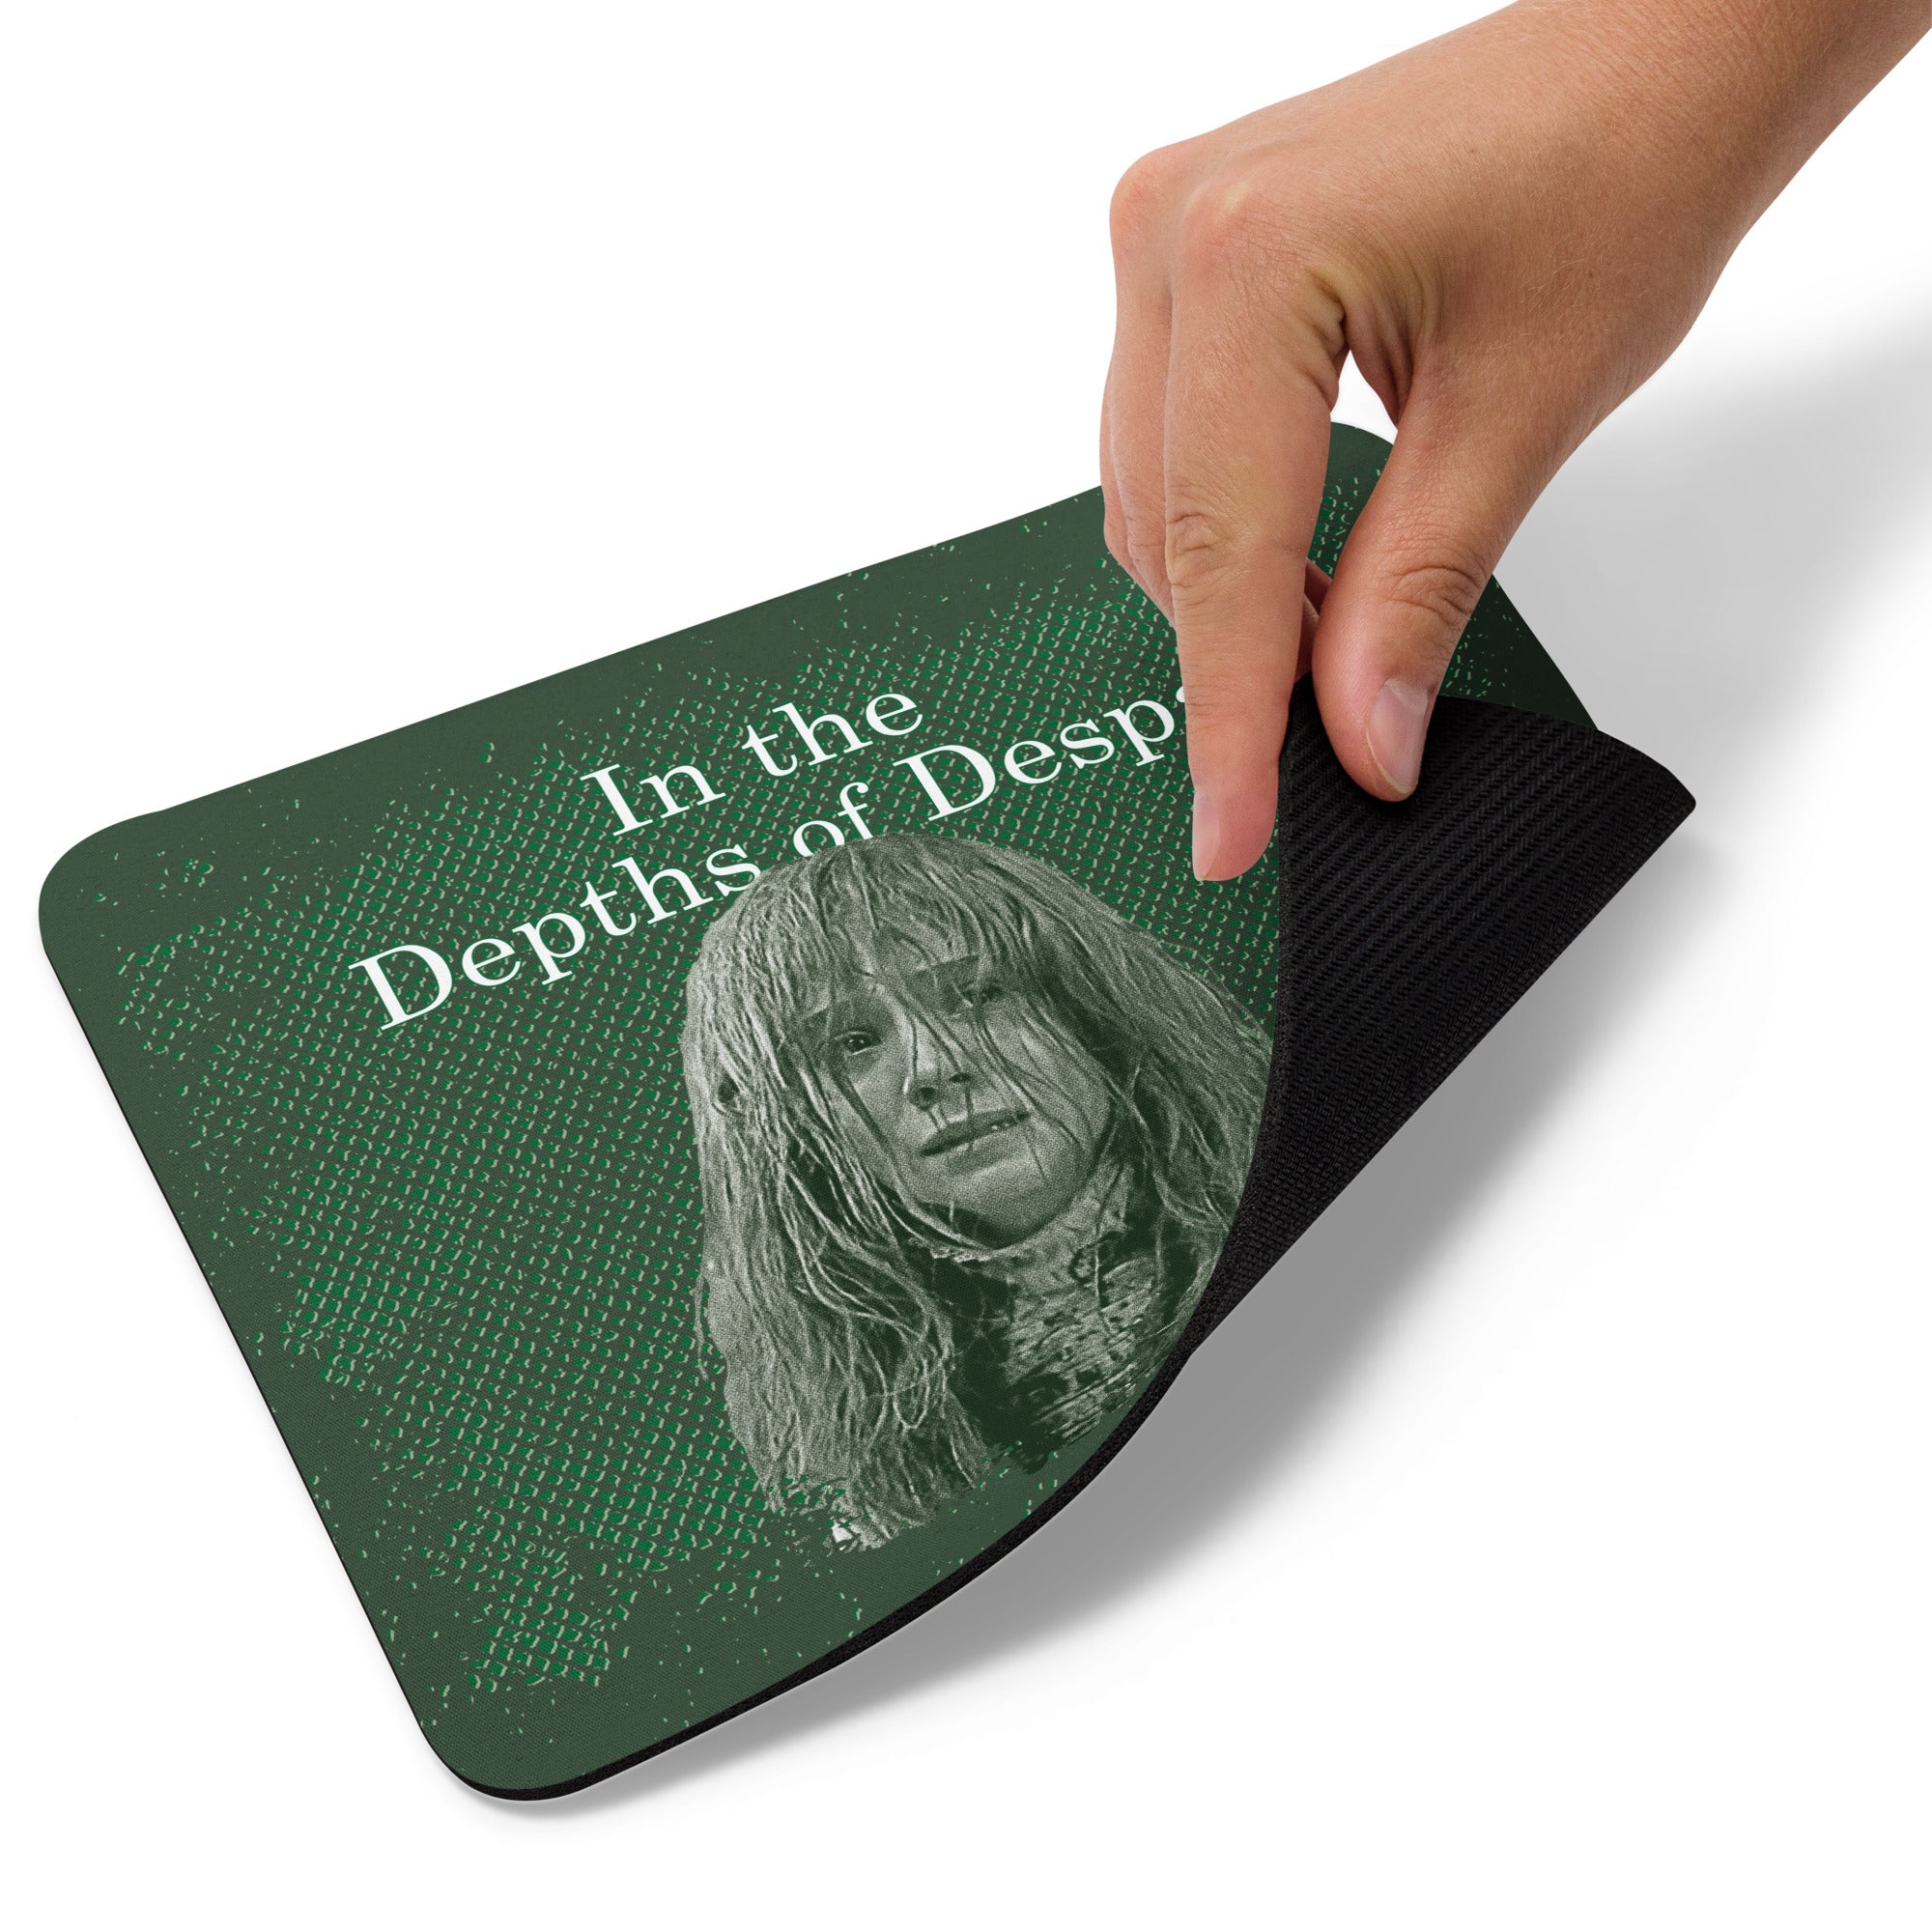 In the Depths of Despair Mouse Pad